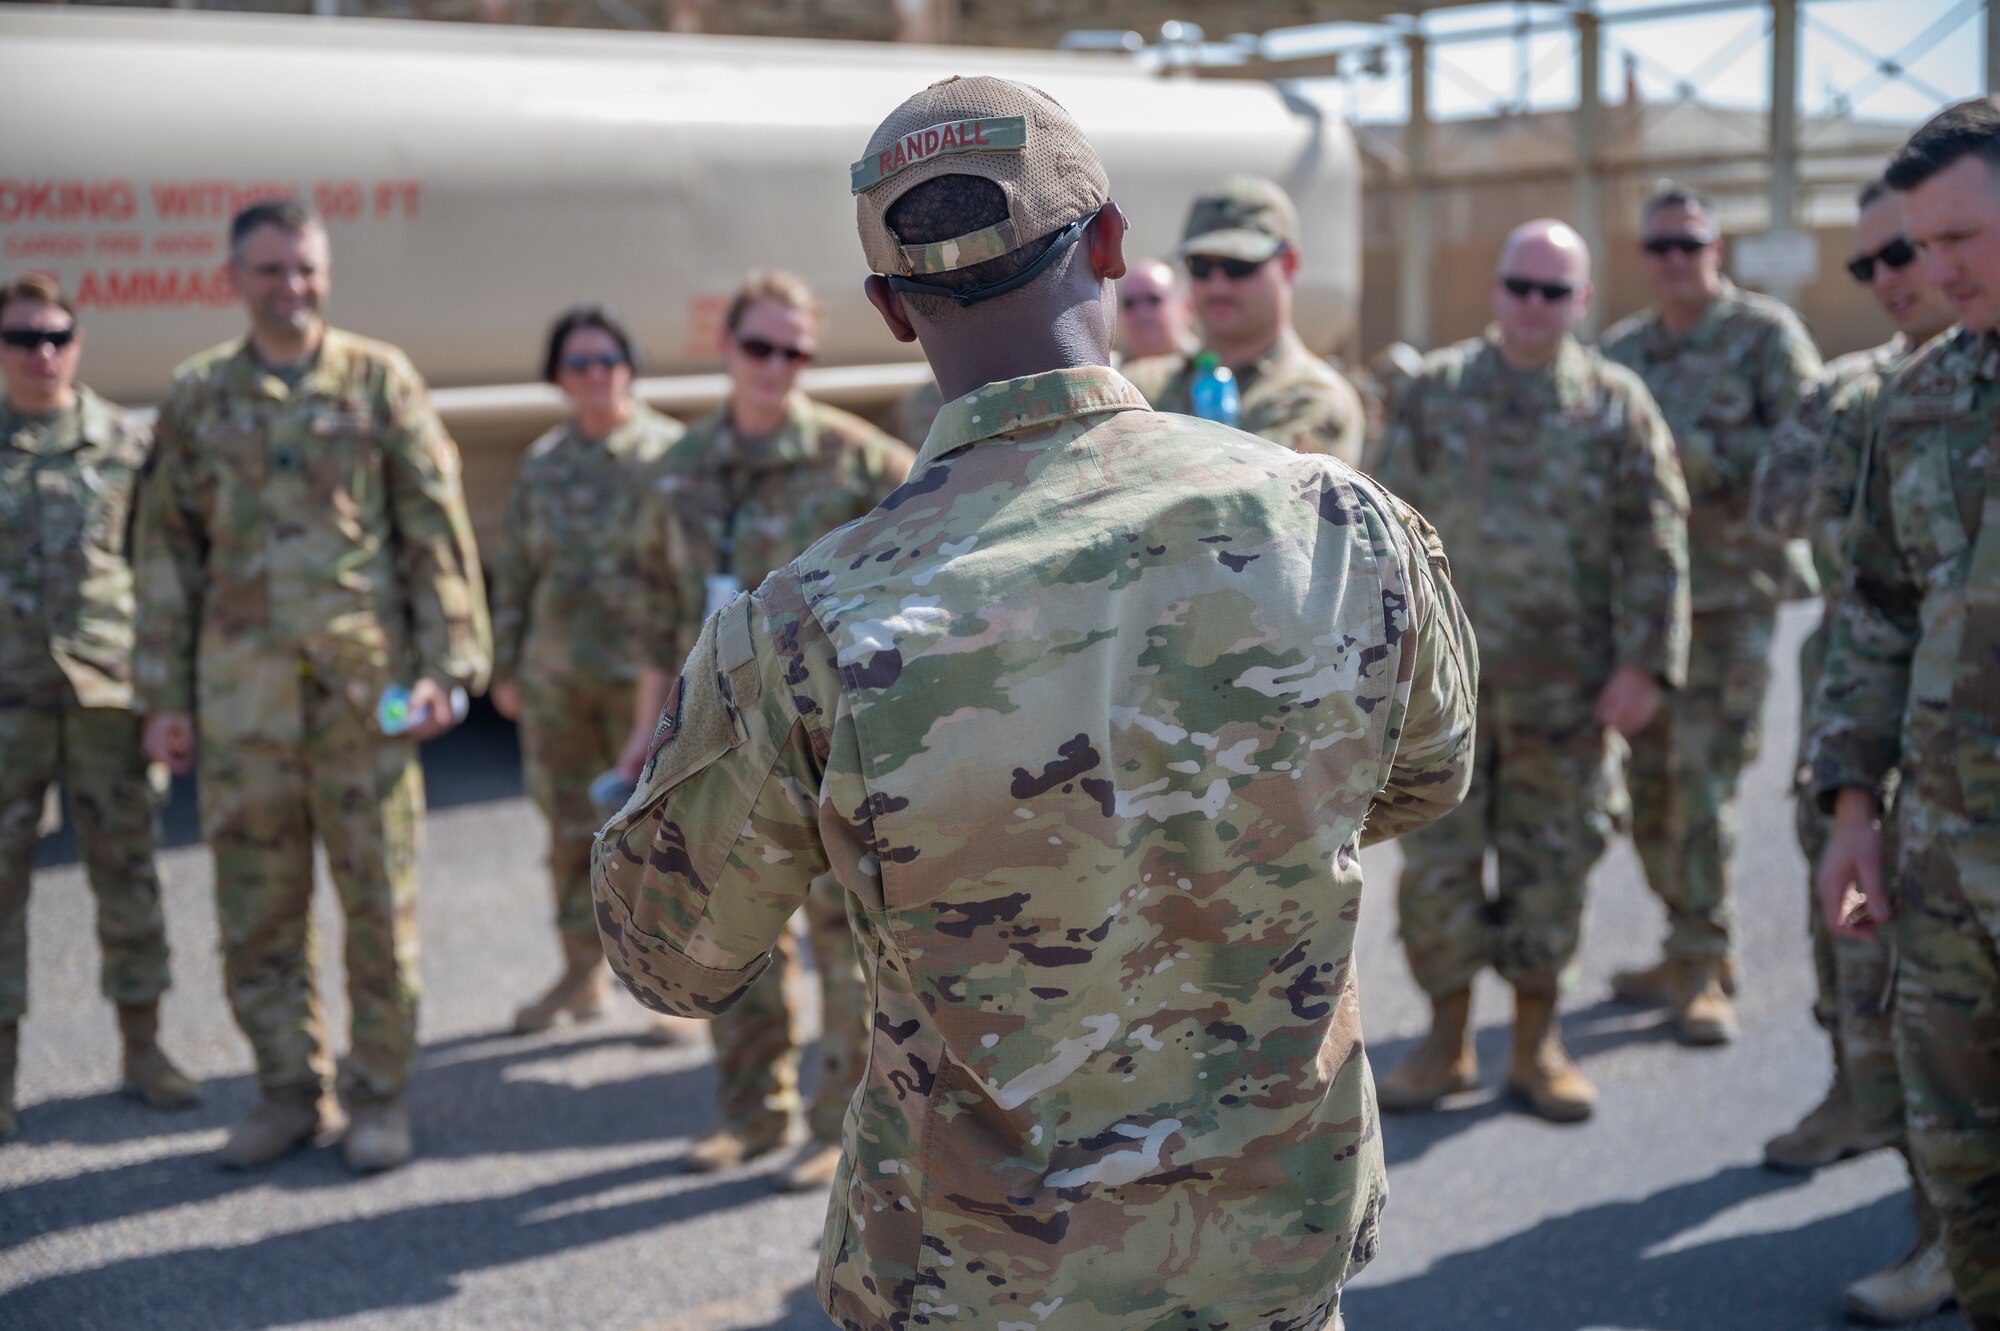 U.S. Air Force Staff Sgt. Raymond Randall, a fuels facility technician assigned to the 386th Expeditionary Logistics Readiness Squadron, discusses fuel operations with Airmen at Ali Al Salem Air Base, Kuwait, on Oct. 15, 2021.